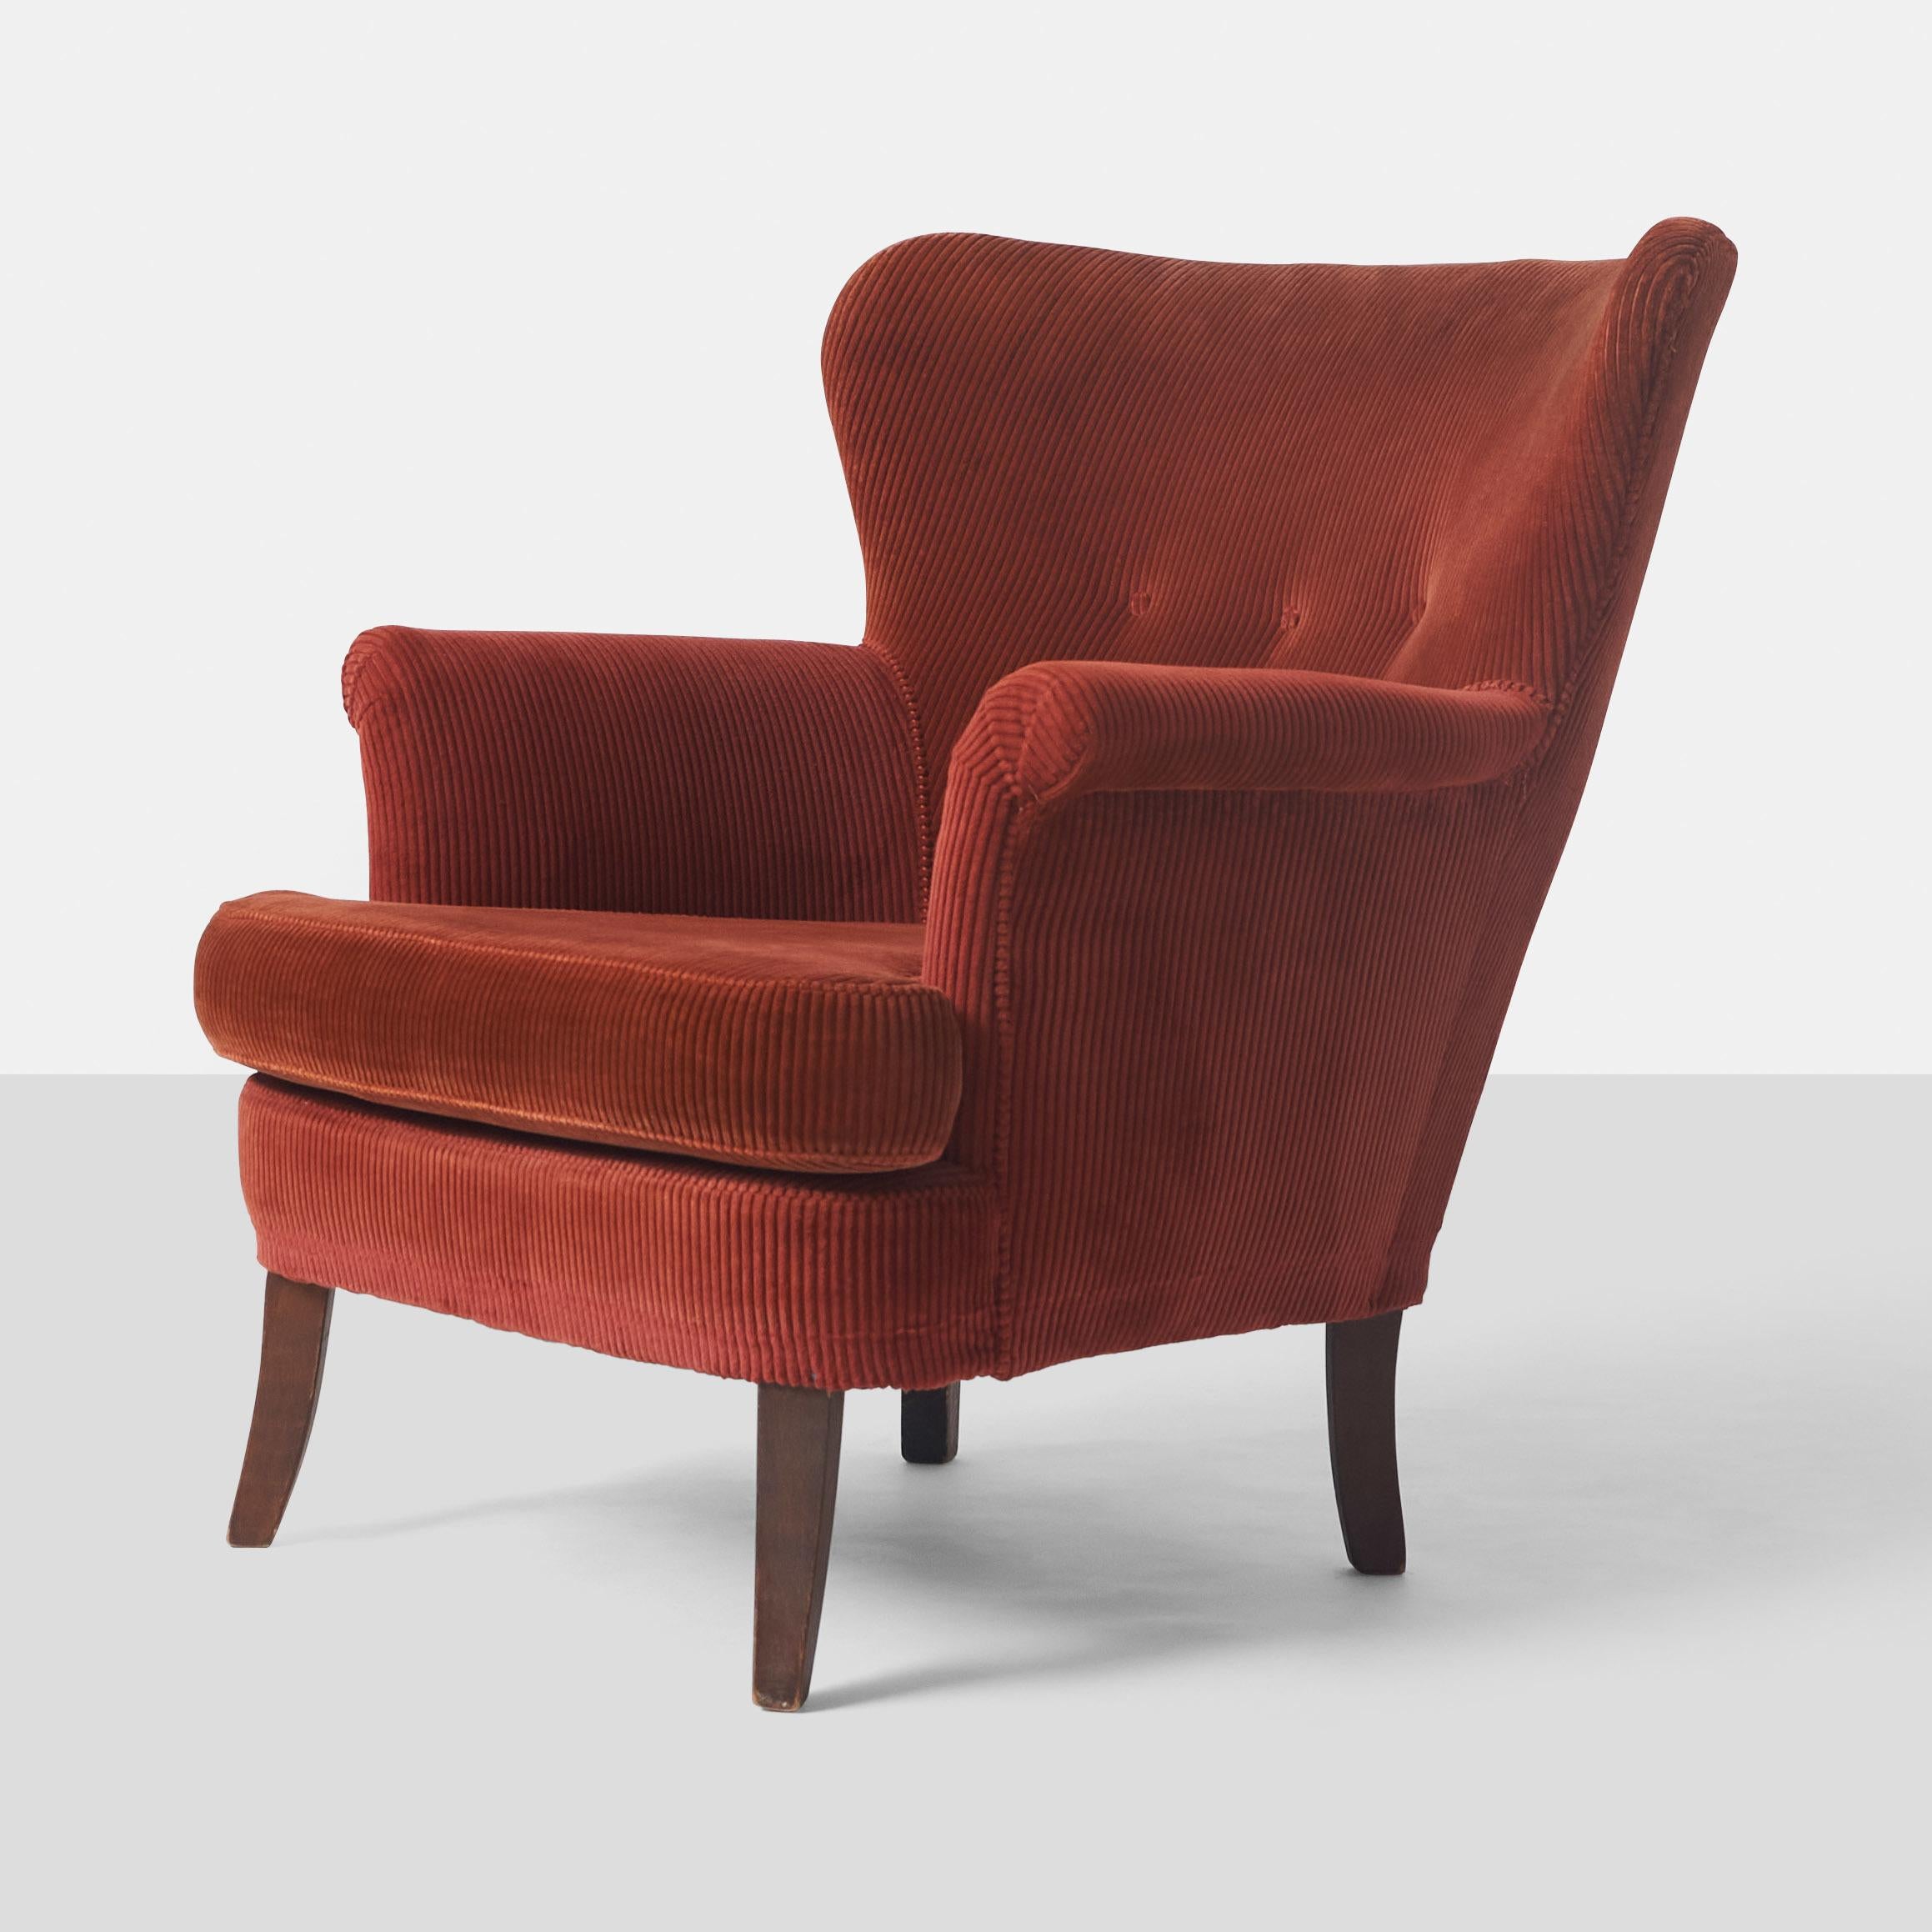 This low wingback lounge chair by Theo Ruth features a tufted back with three buttons, covered in a deep red corduroy fabric. Its teak legs are in good condition, with only minor scuffing, making it an ideal piece to reupholster.